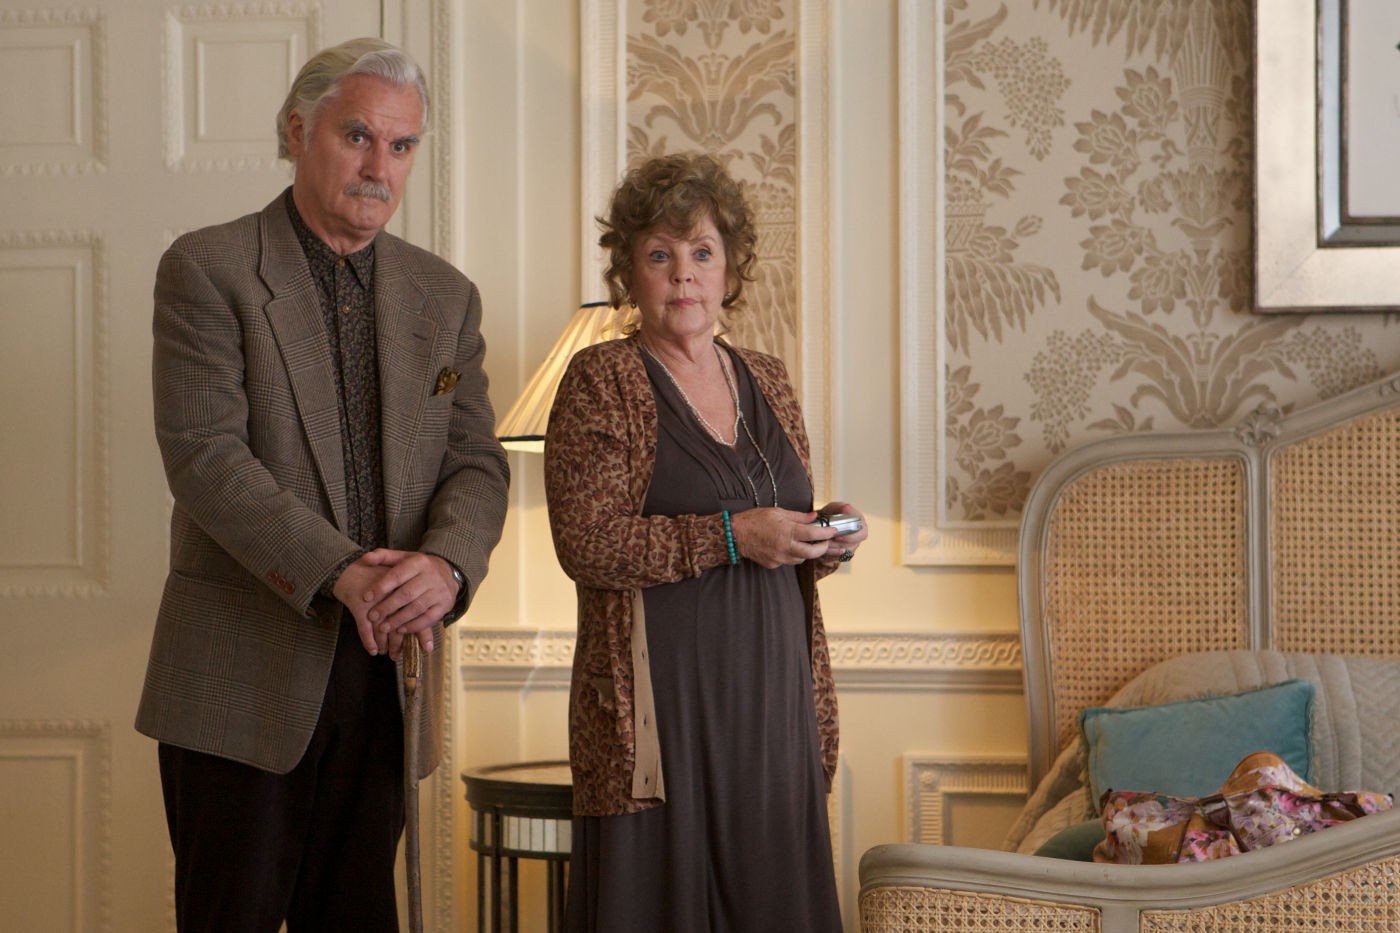 Billy Connolly stars as Wilf Bond and Pauline Collins stars as Cissy Robson in The Weinstein Company's Quartet (2013)